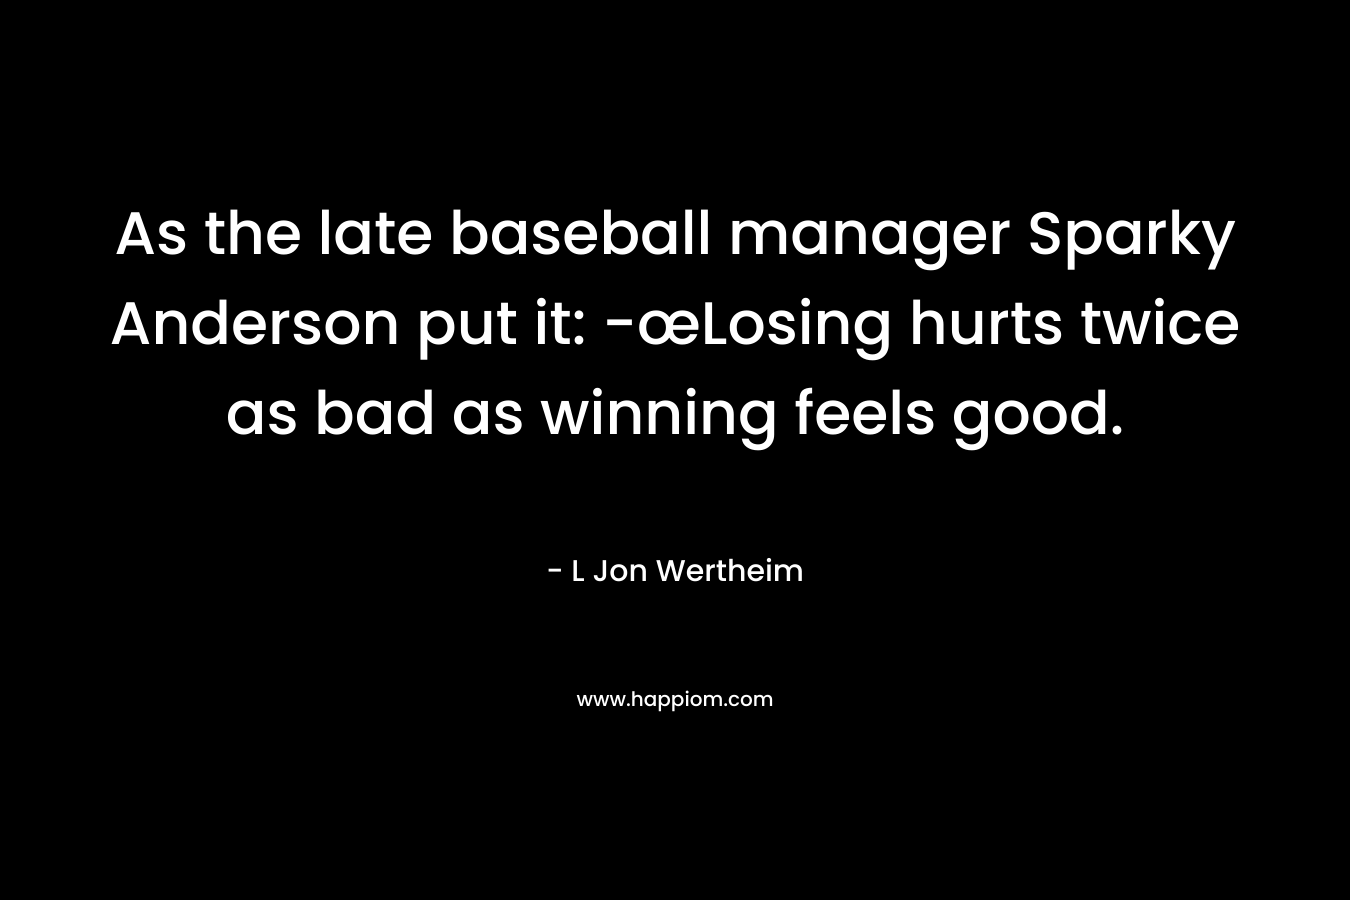 As the late baseball manager Sparky Anderson put it: -œLosing hurts twice as bad as winning feels good. – L Jon Wertheim